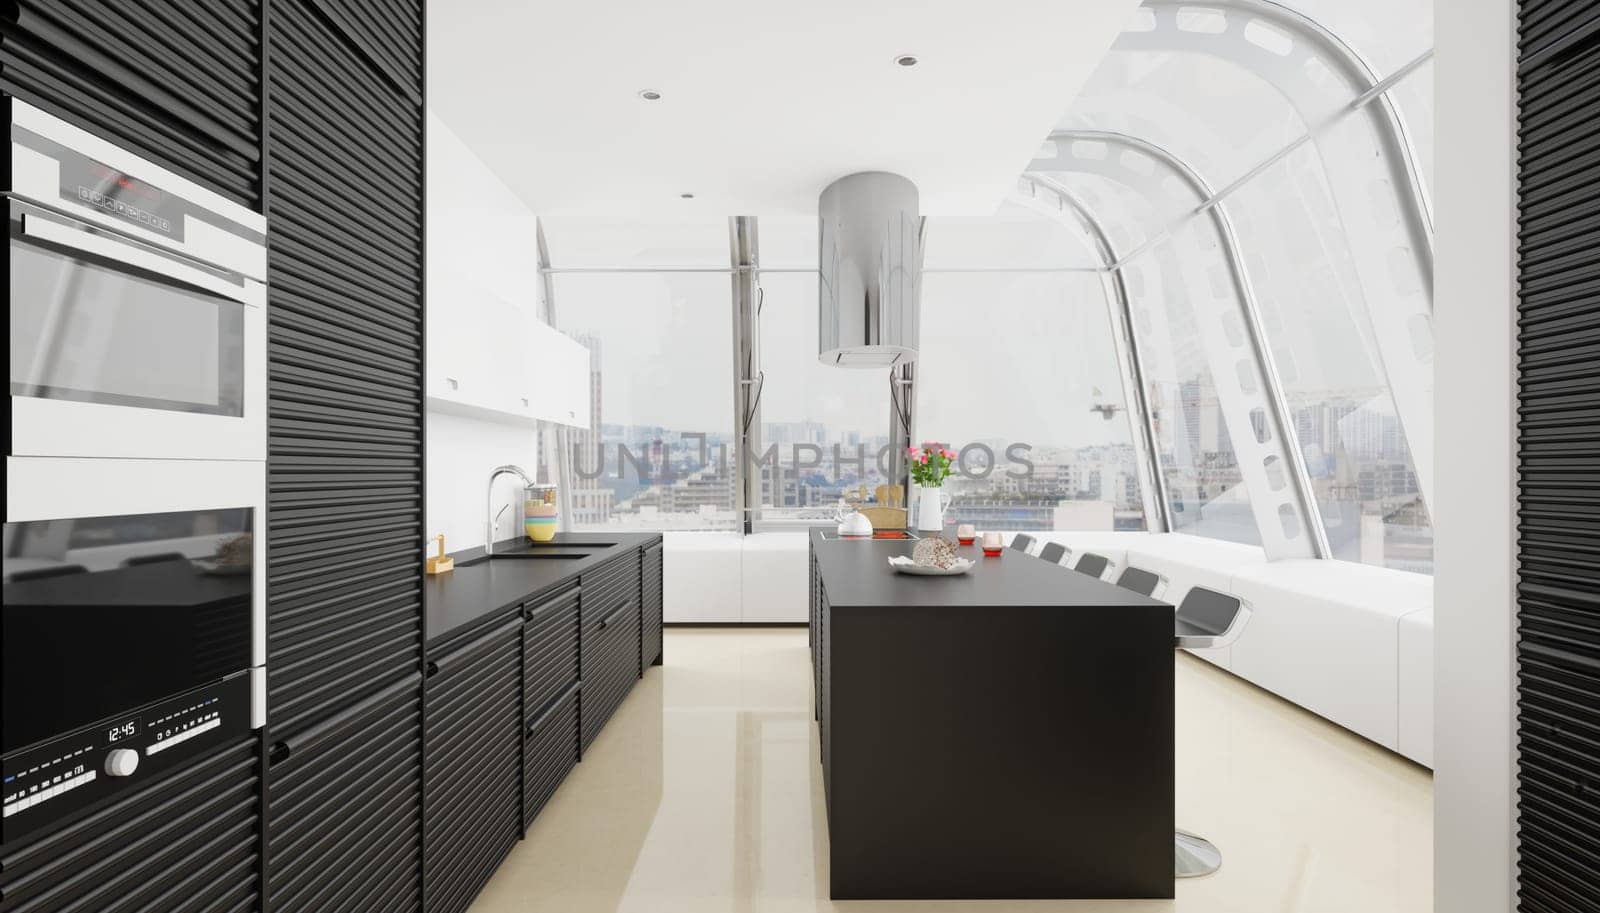 interior of modern kitchen with black and white furniture. by vicnt